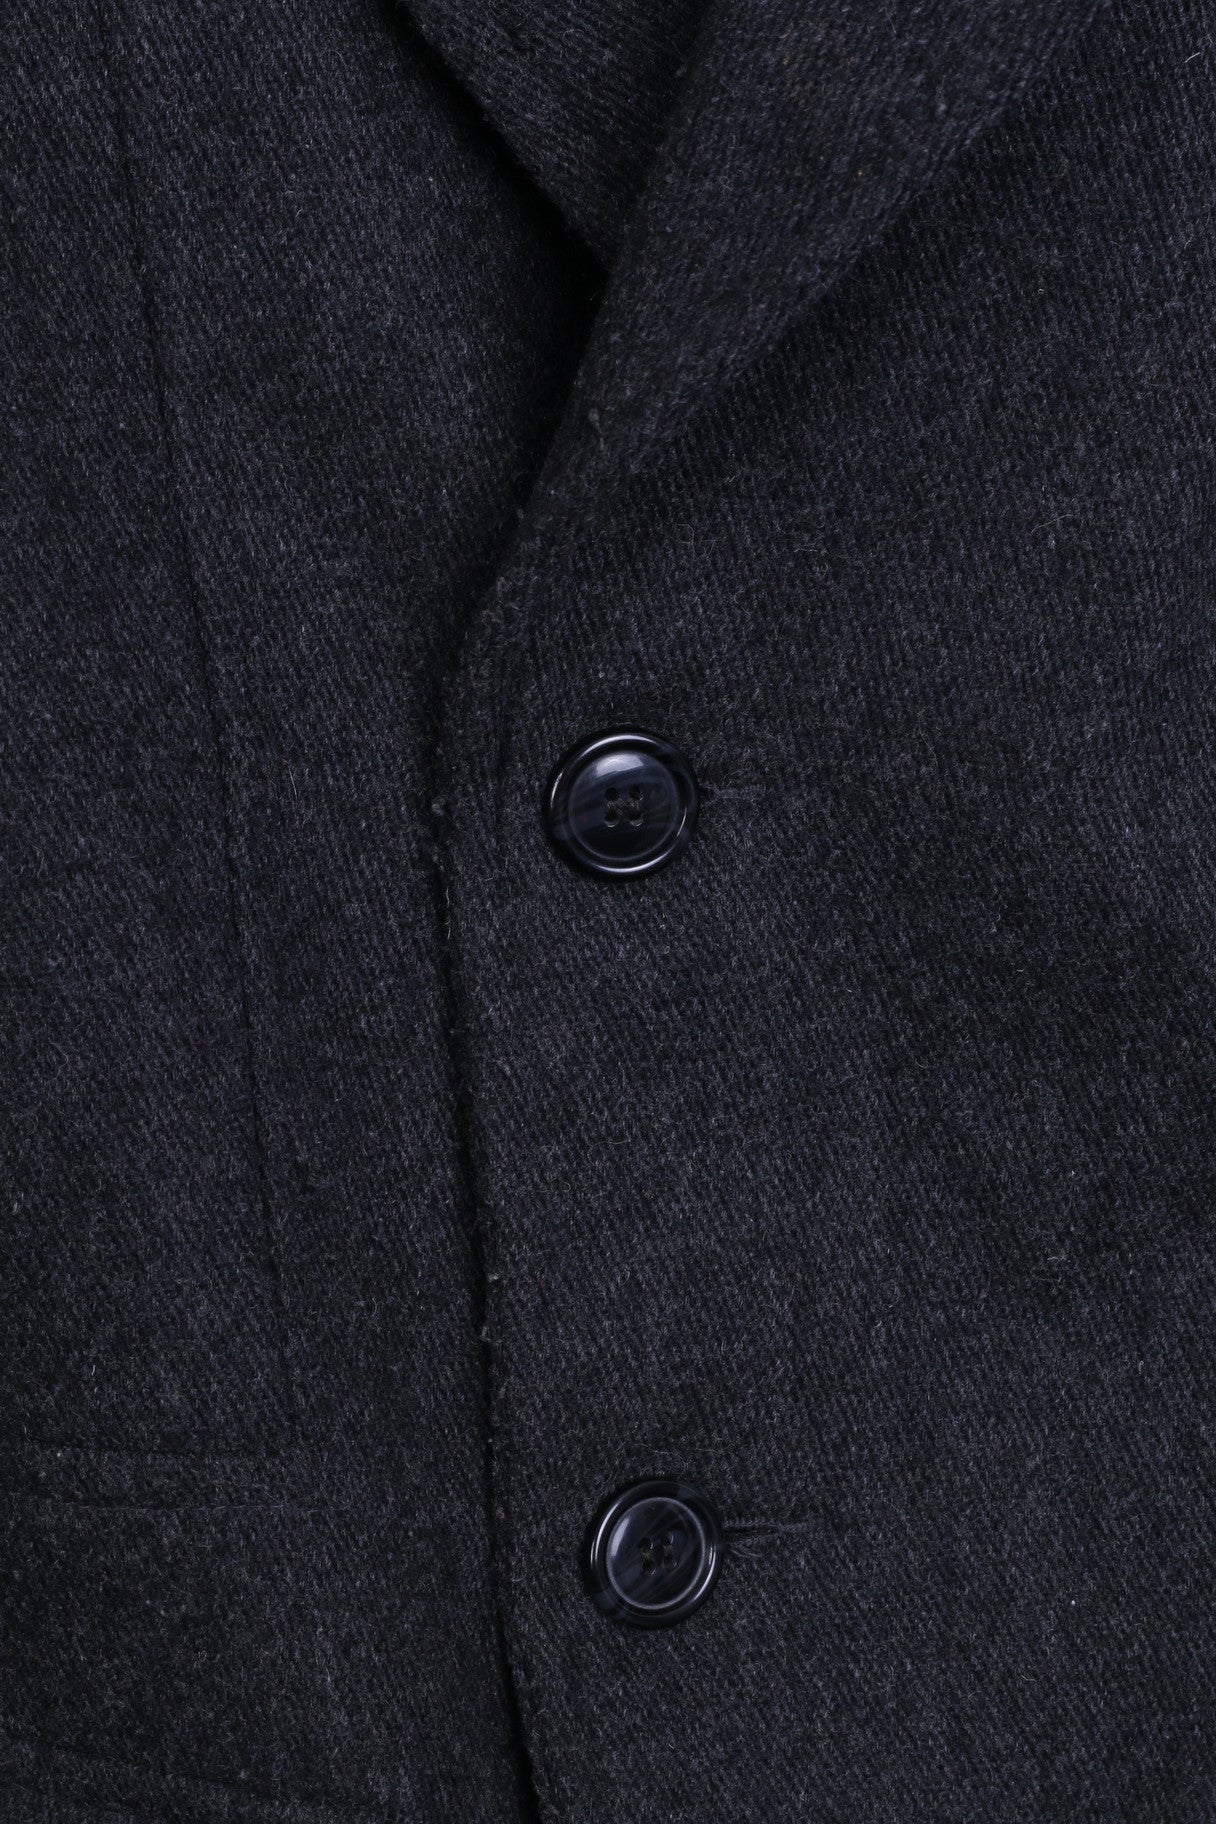 DISSIDENT Mens M Jacket Double Breasted Dark Grey Wool - RetrospectClothes